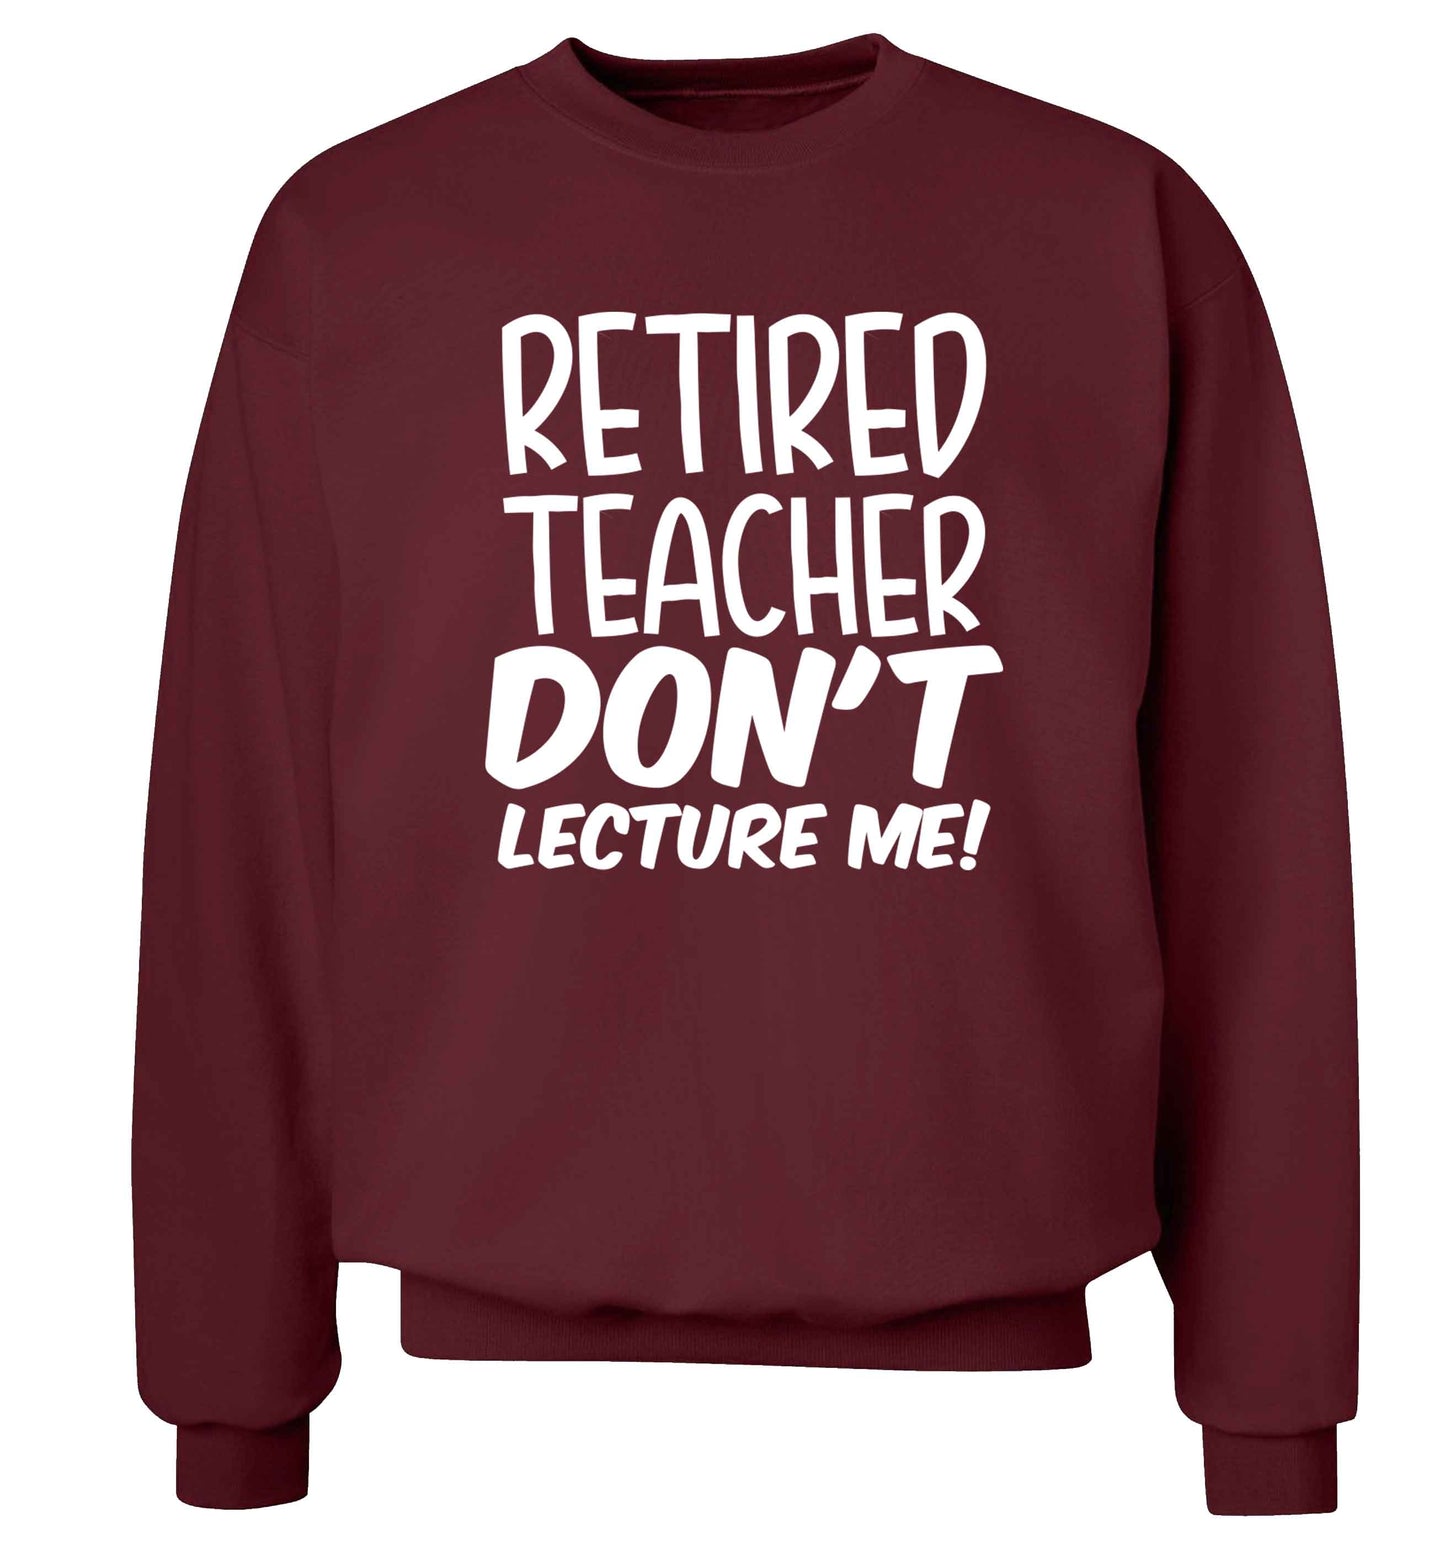 Retired teacher don't lecture me! Adult's unisex maroon Sweater 2XL